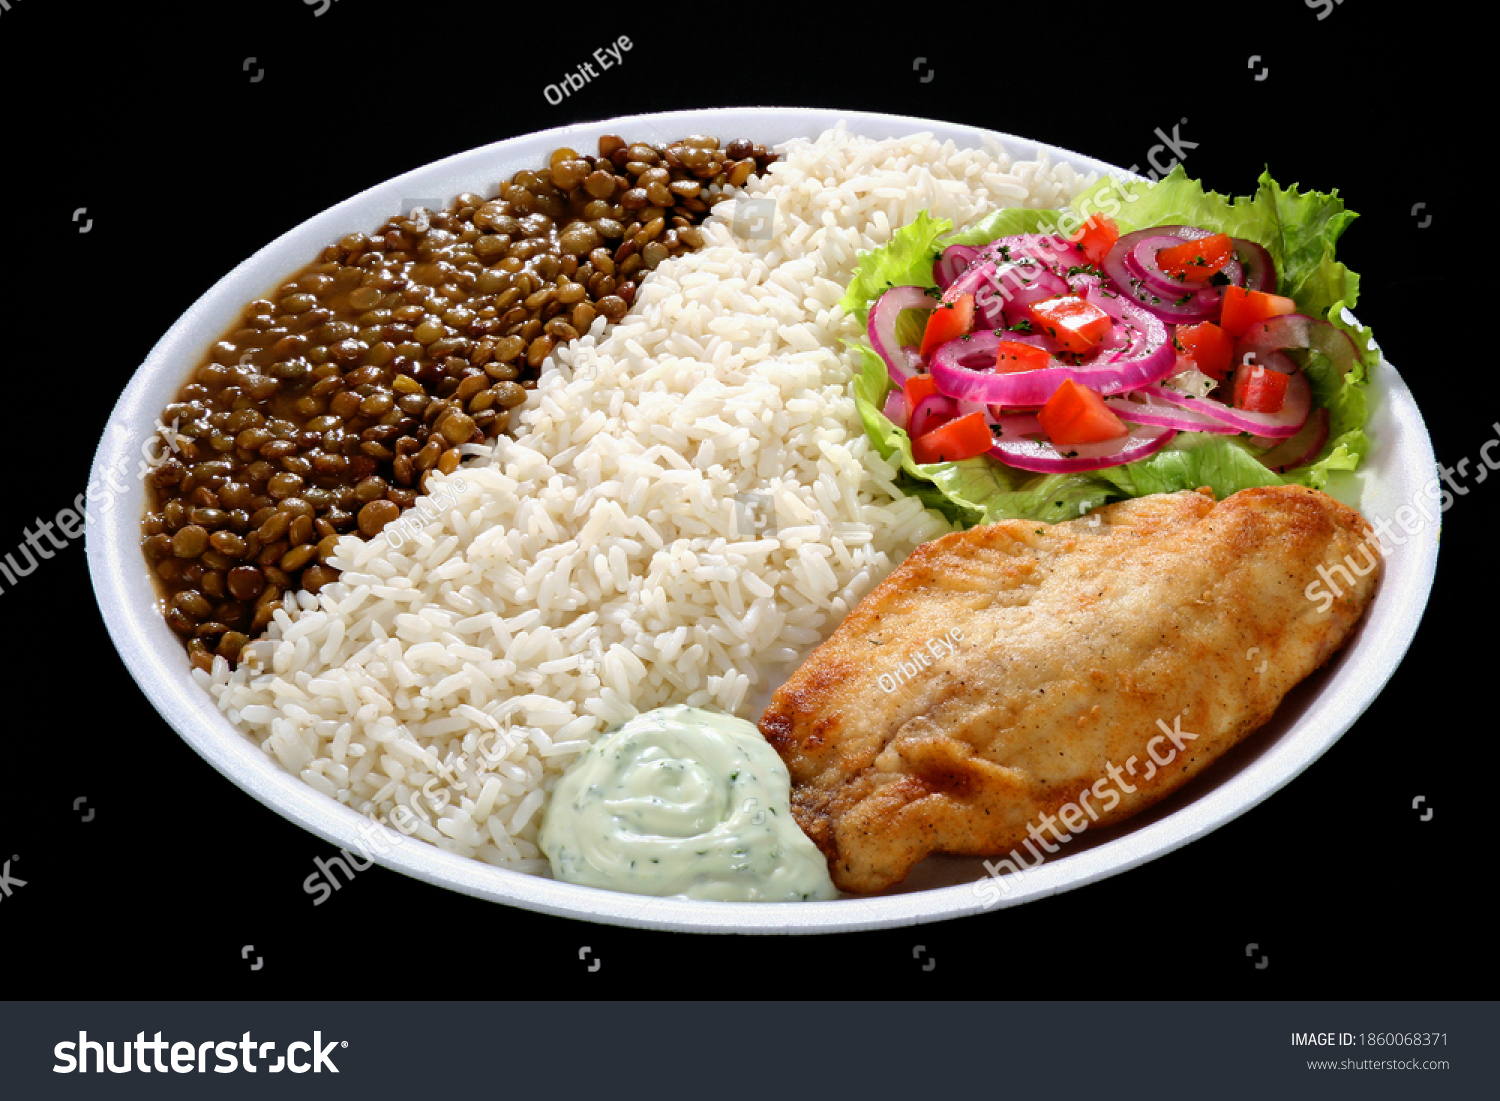 Traditional lunch dish in Ecuador consisting of chicken breast, rice, lentils, salad and a small portion of tartar sauce. #1860068371